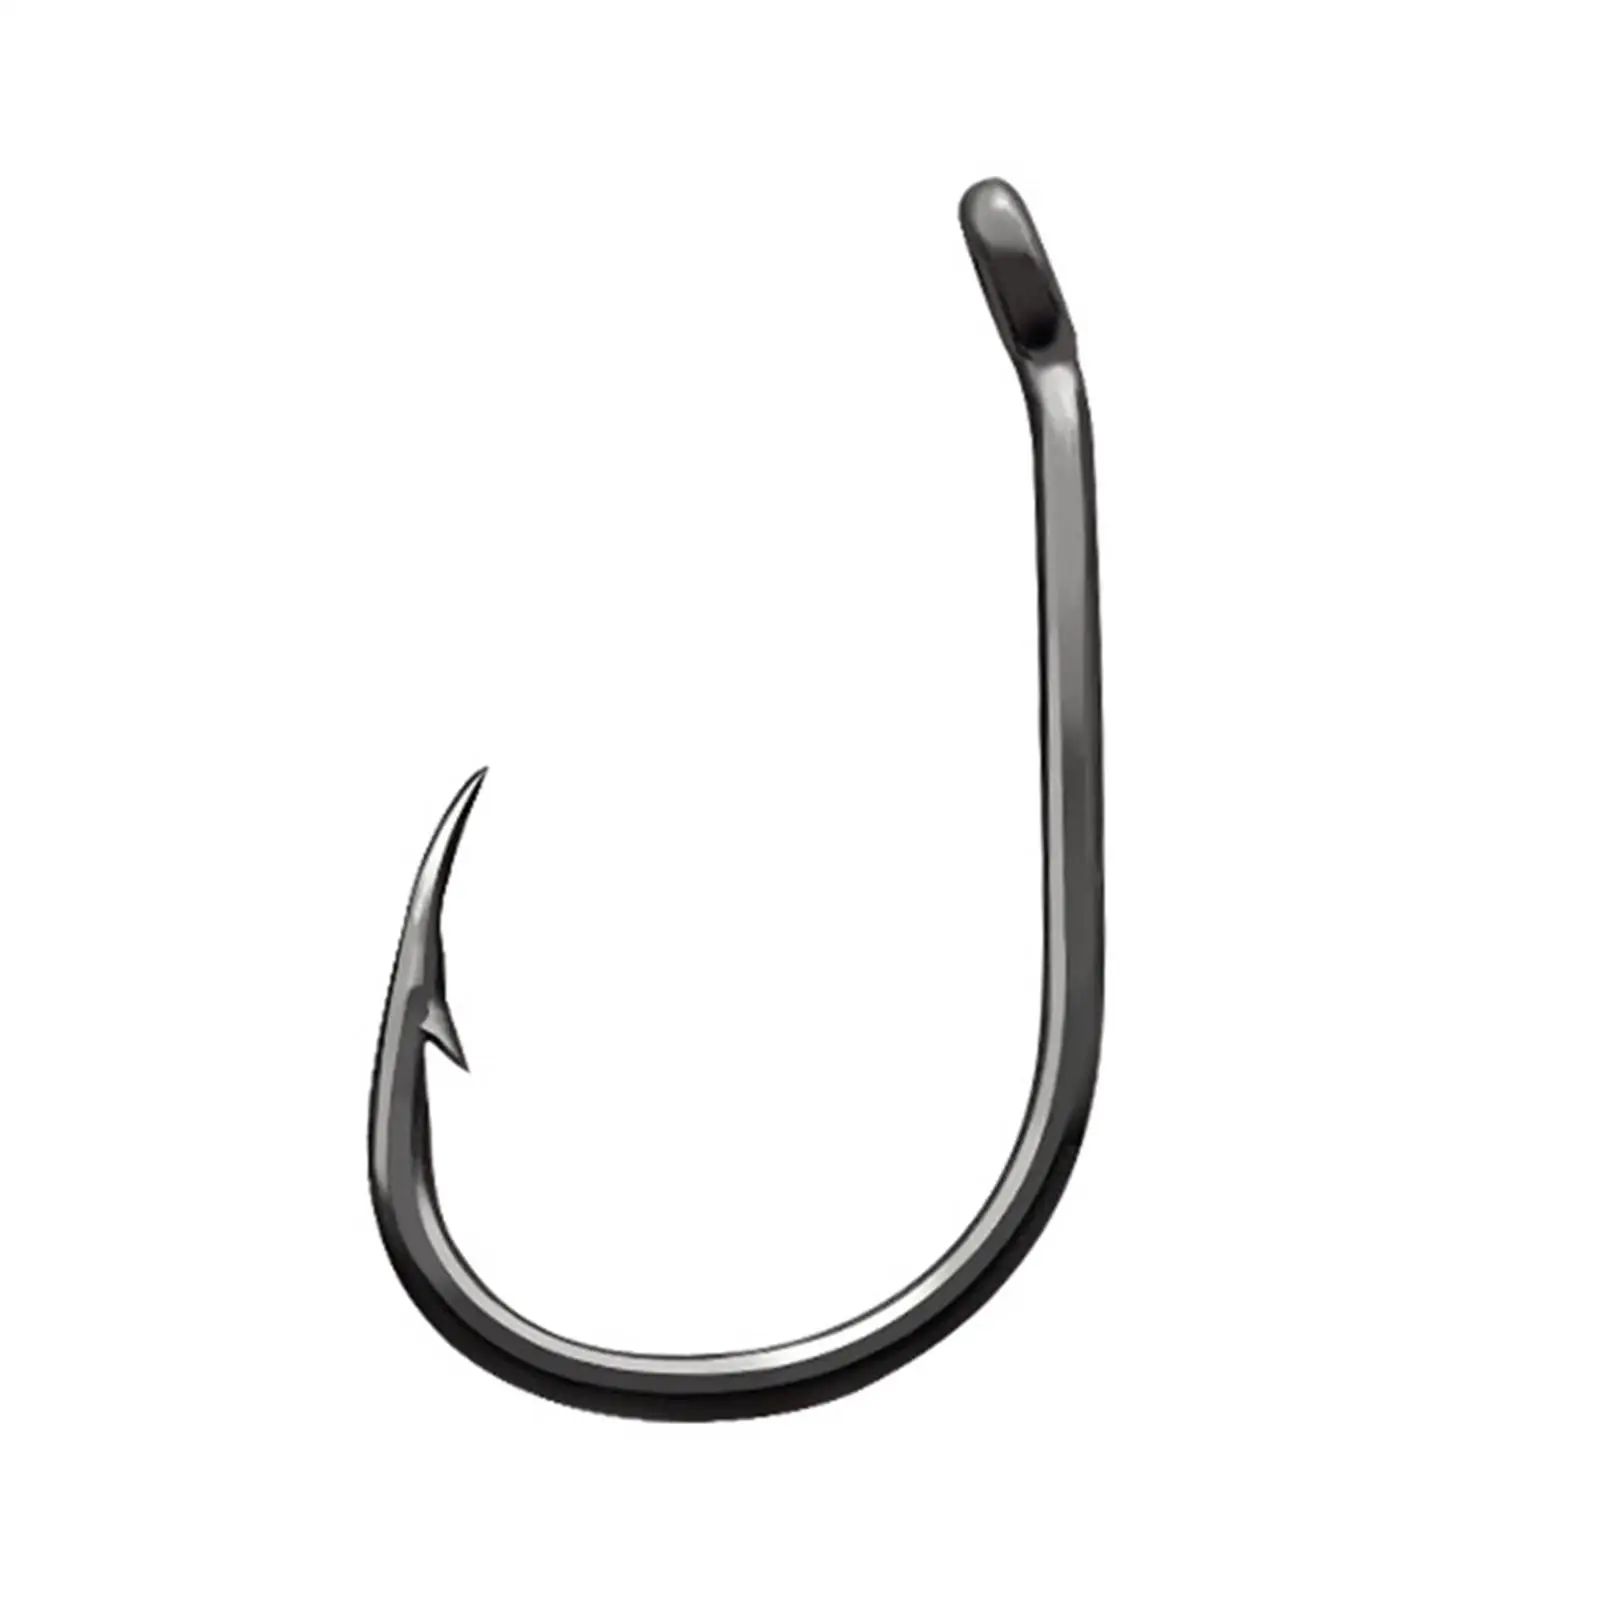 50x Fly Fishing Hooks Fishing Tackle Accessories Fly Tying Materials Supplies Heavy Duty Fly Tying Hooks for Sports Saltwater